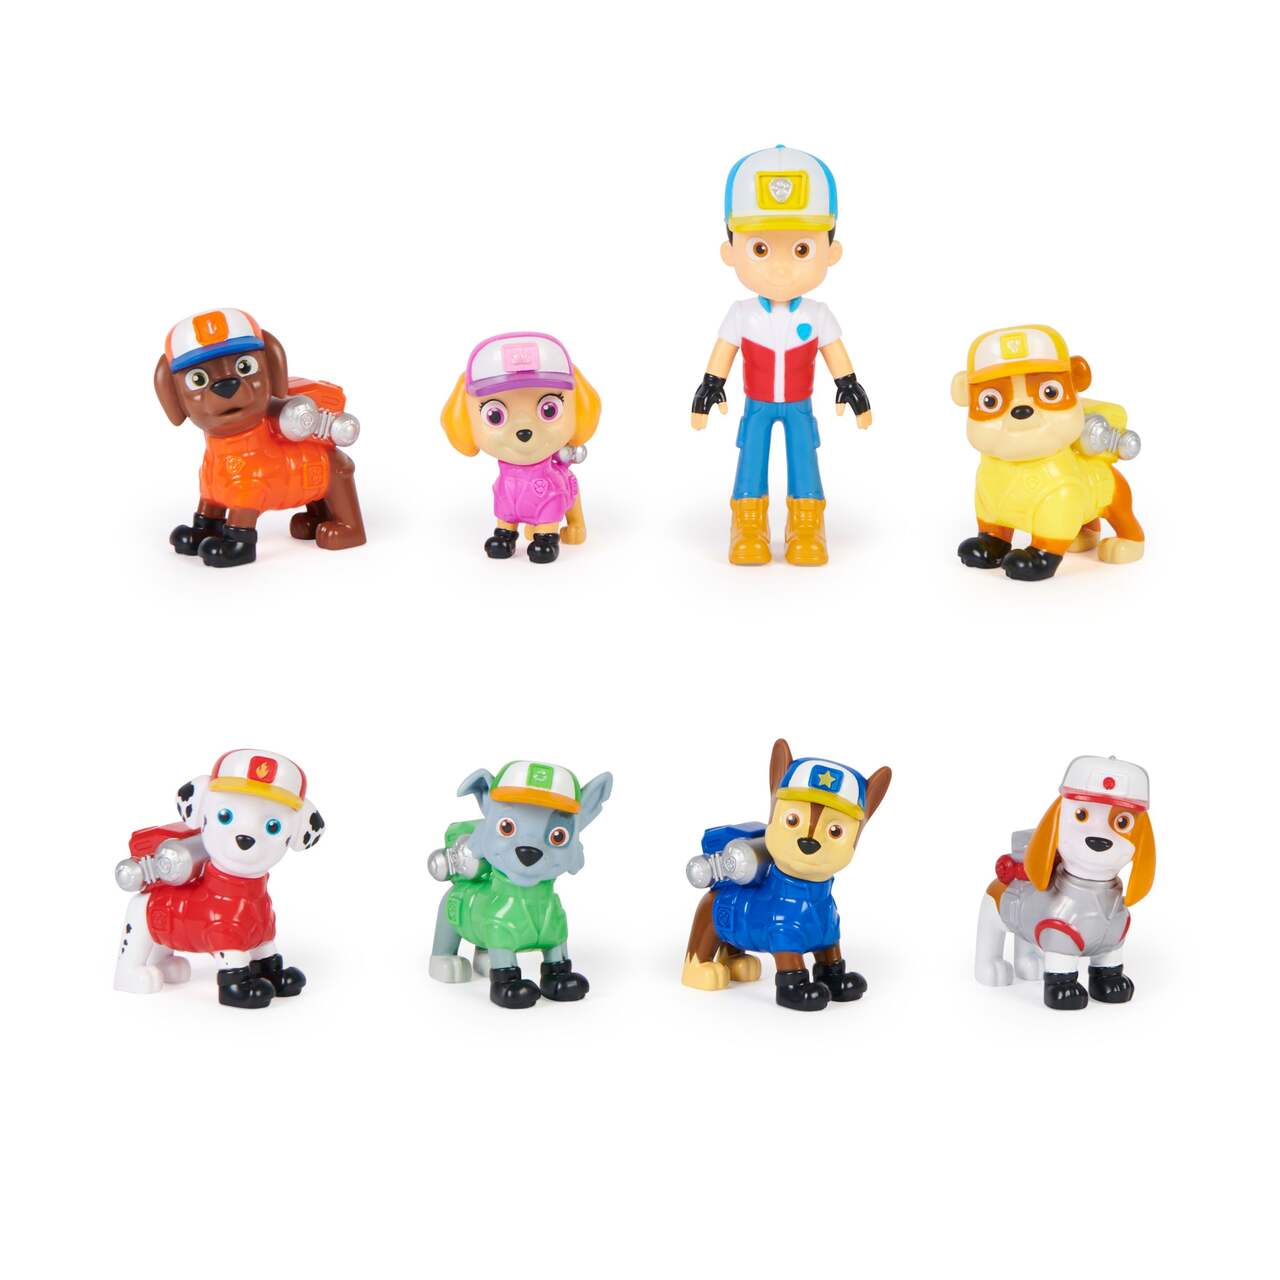 https://media-www.canadiantire.ca/product/seasonal-gardening/toys/preschool-toys-activities/0508914/paw-patrol-big-truck-pups-figure-gift-pack-c452461a-9610-4751-a9f4-30e25f6caf67-jpgrendition.jpg?imdensity=1&imwidth=640&impolicy=mZoom